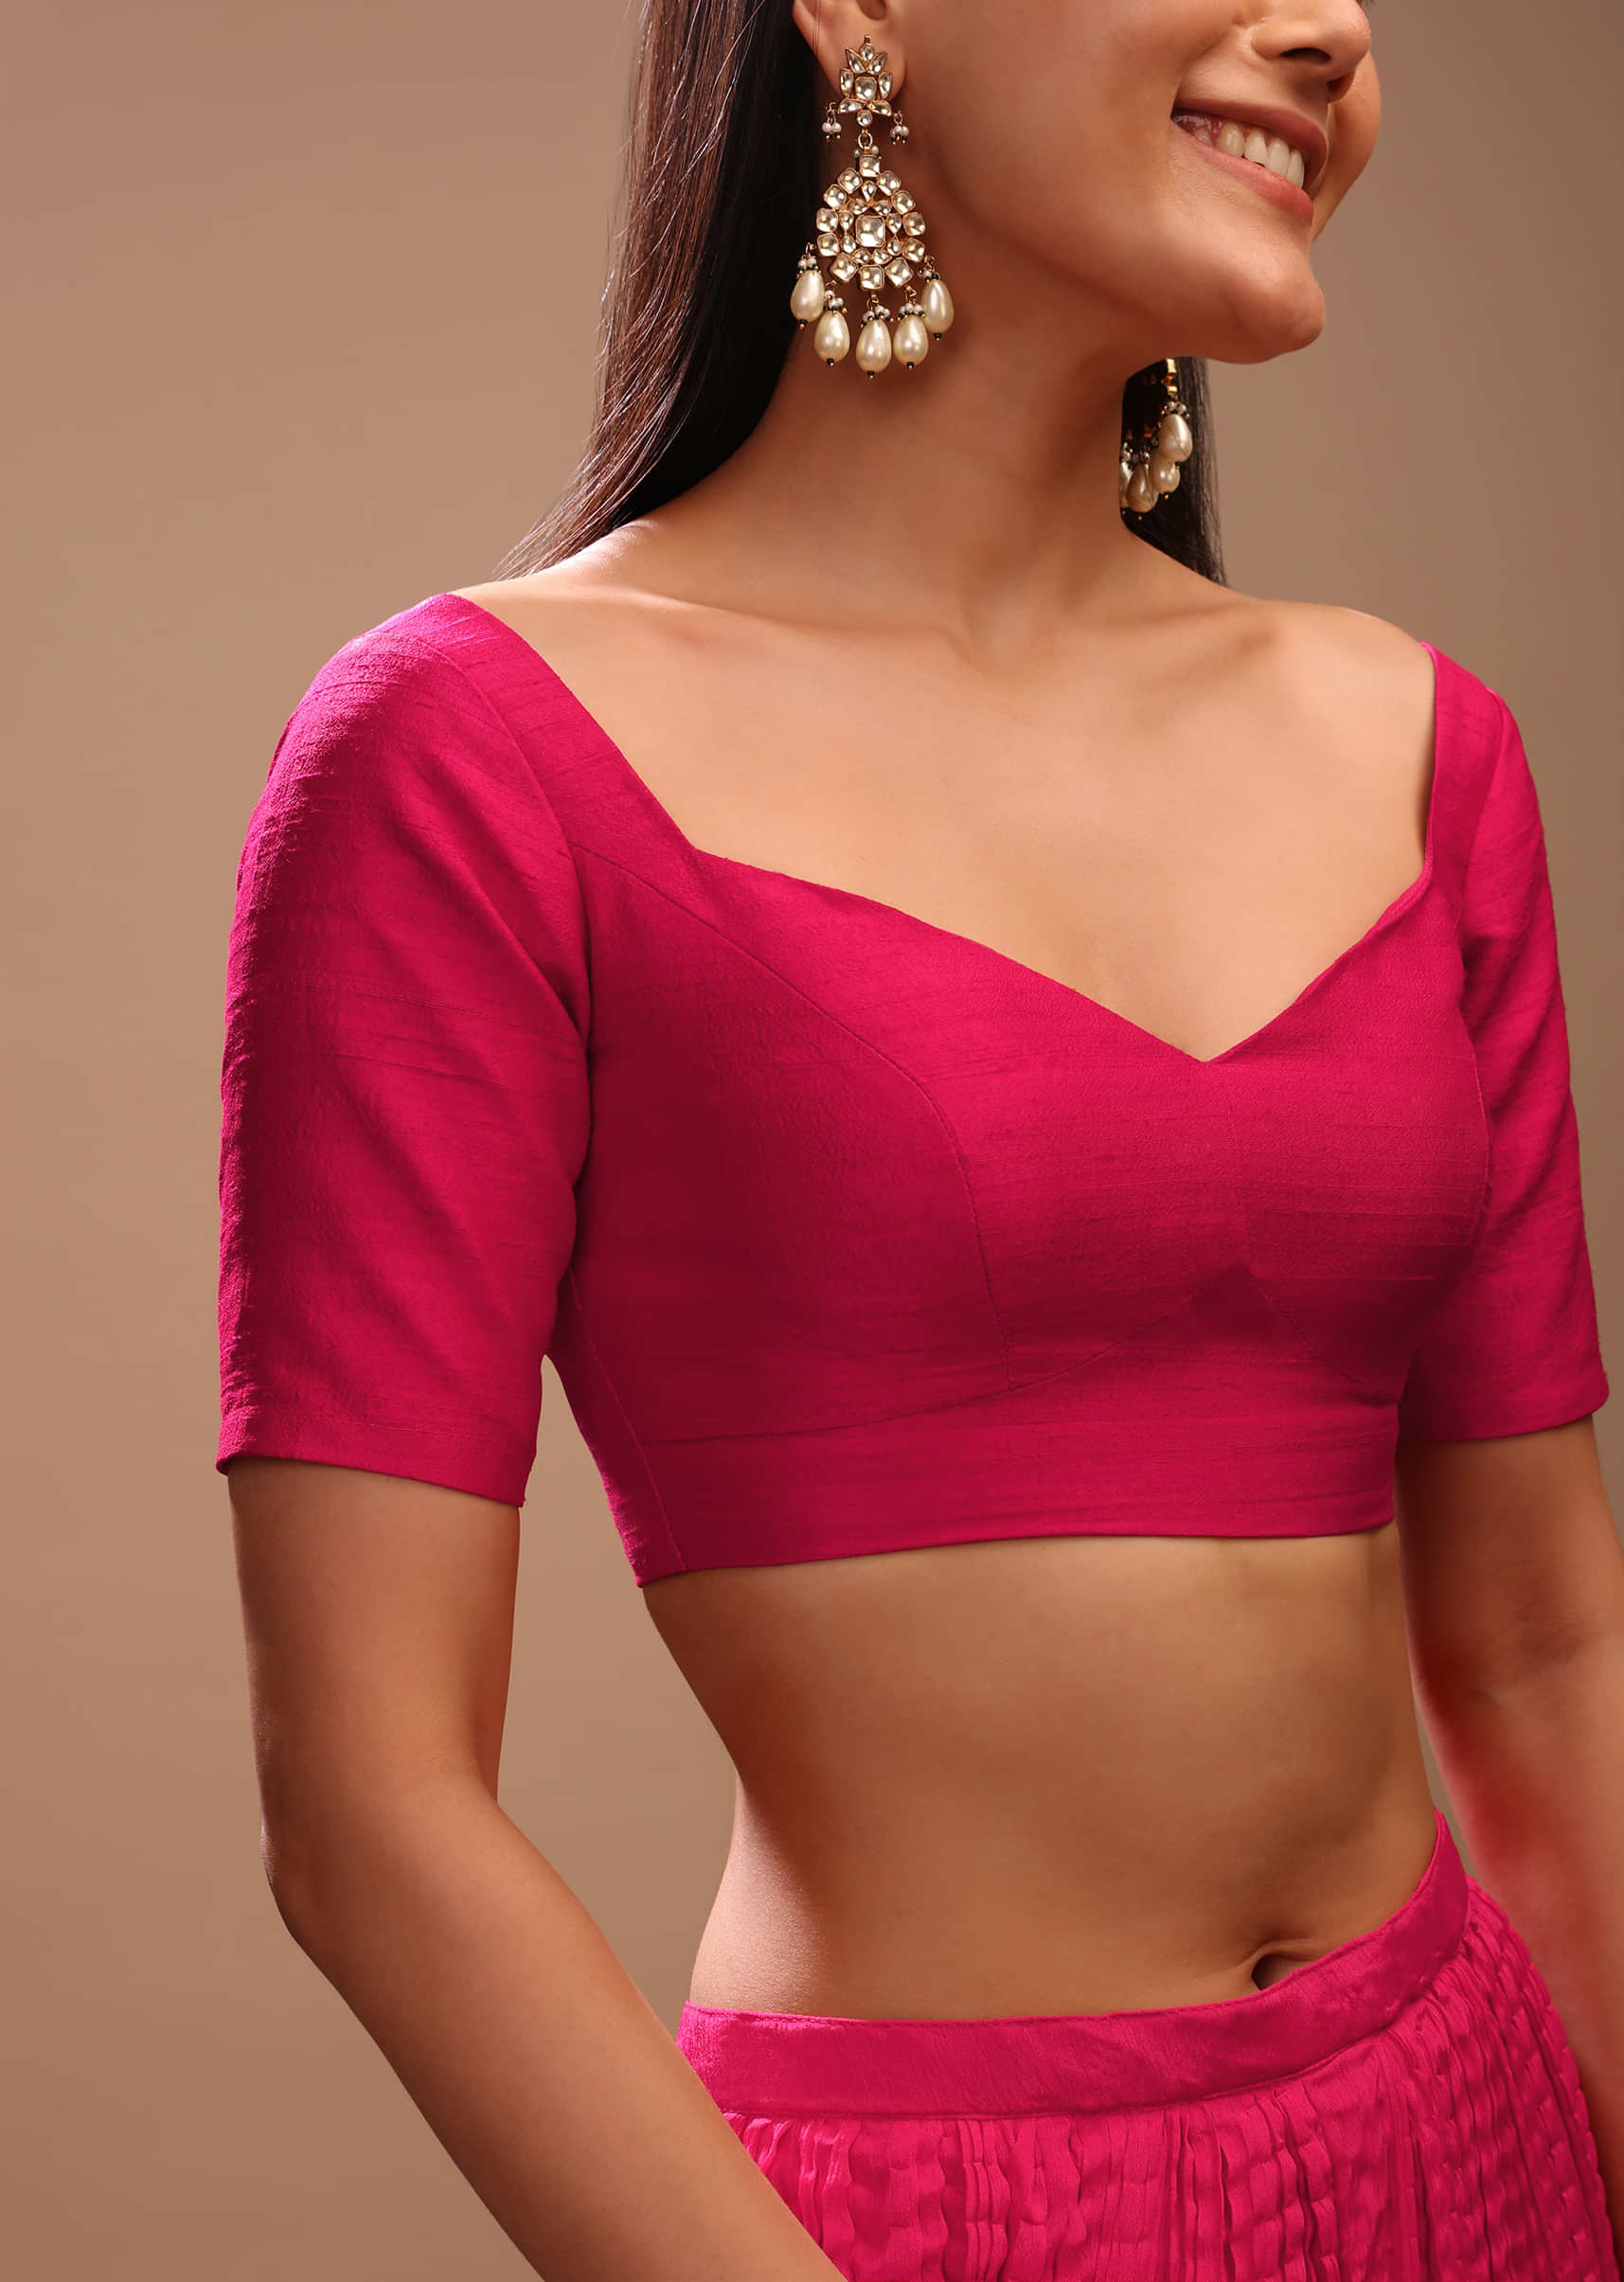 Rani Pink Blouse In Raw Silk With Half Sleeves And Sweetheart Neckline